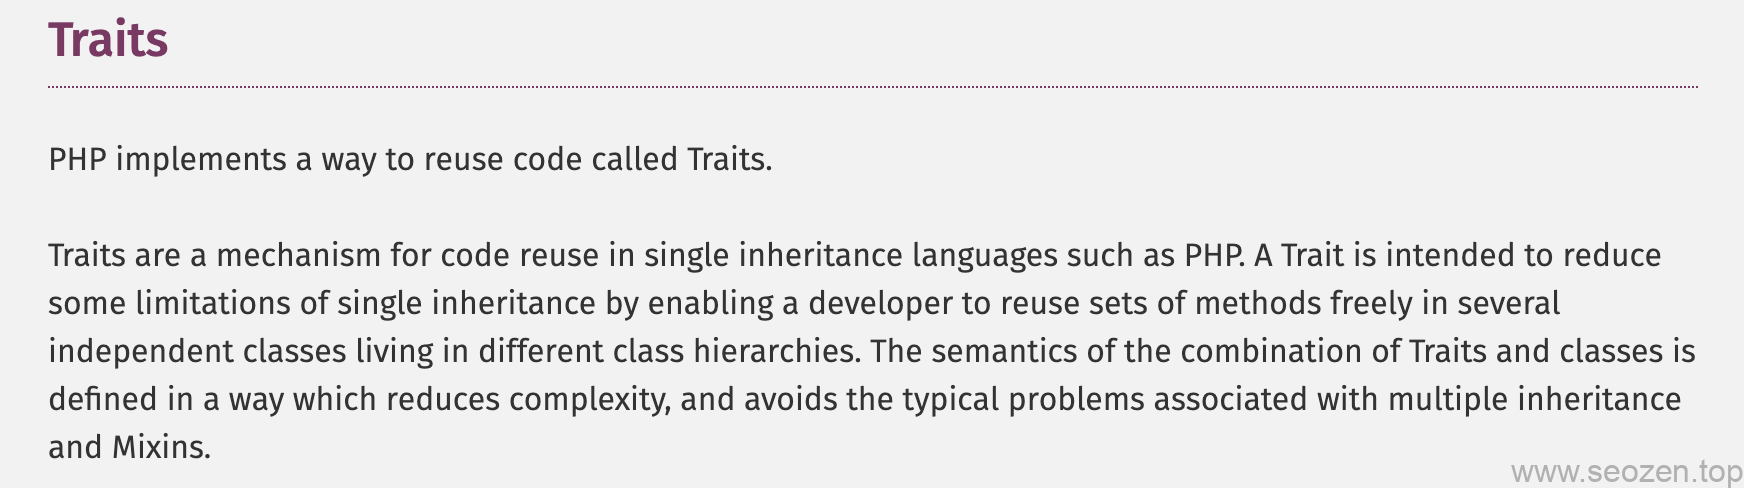 php-traits-definition